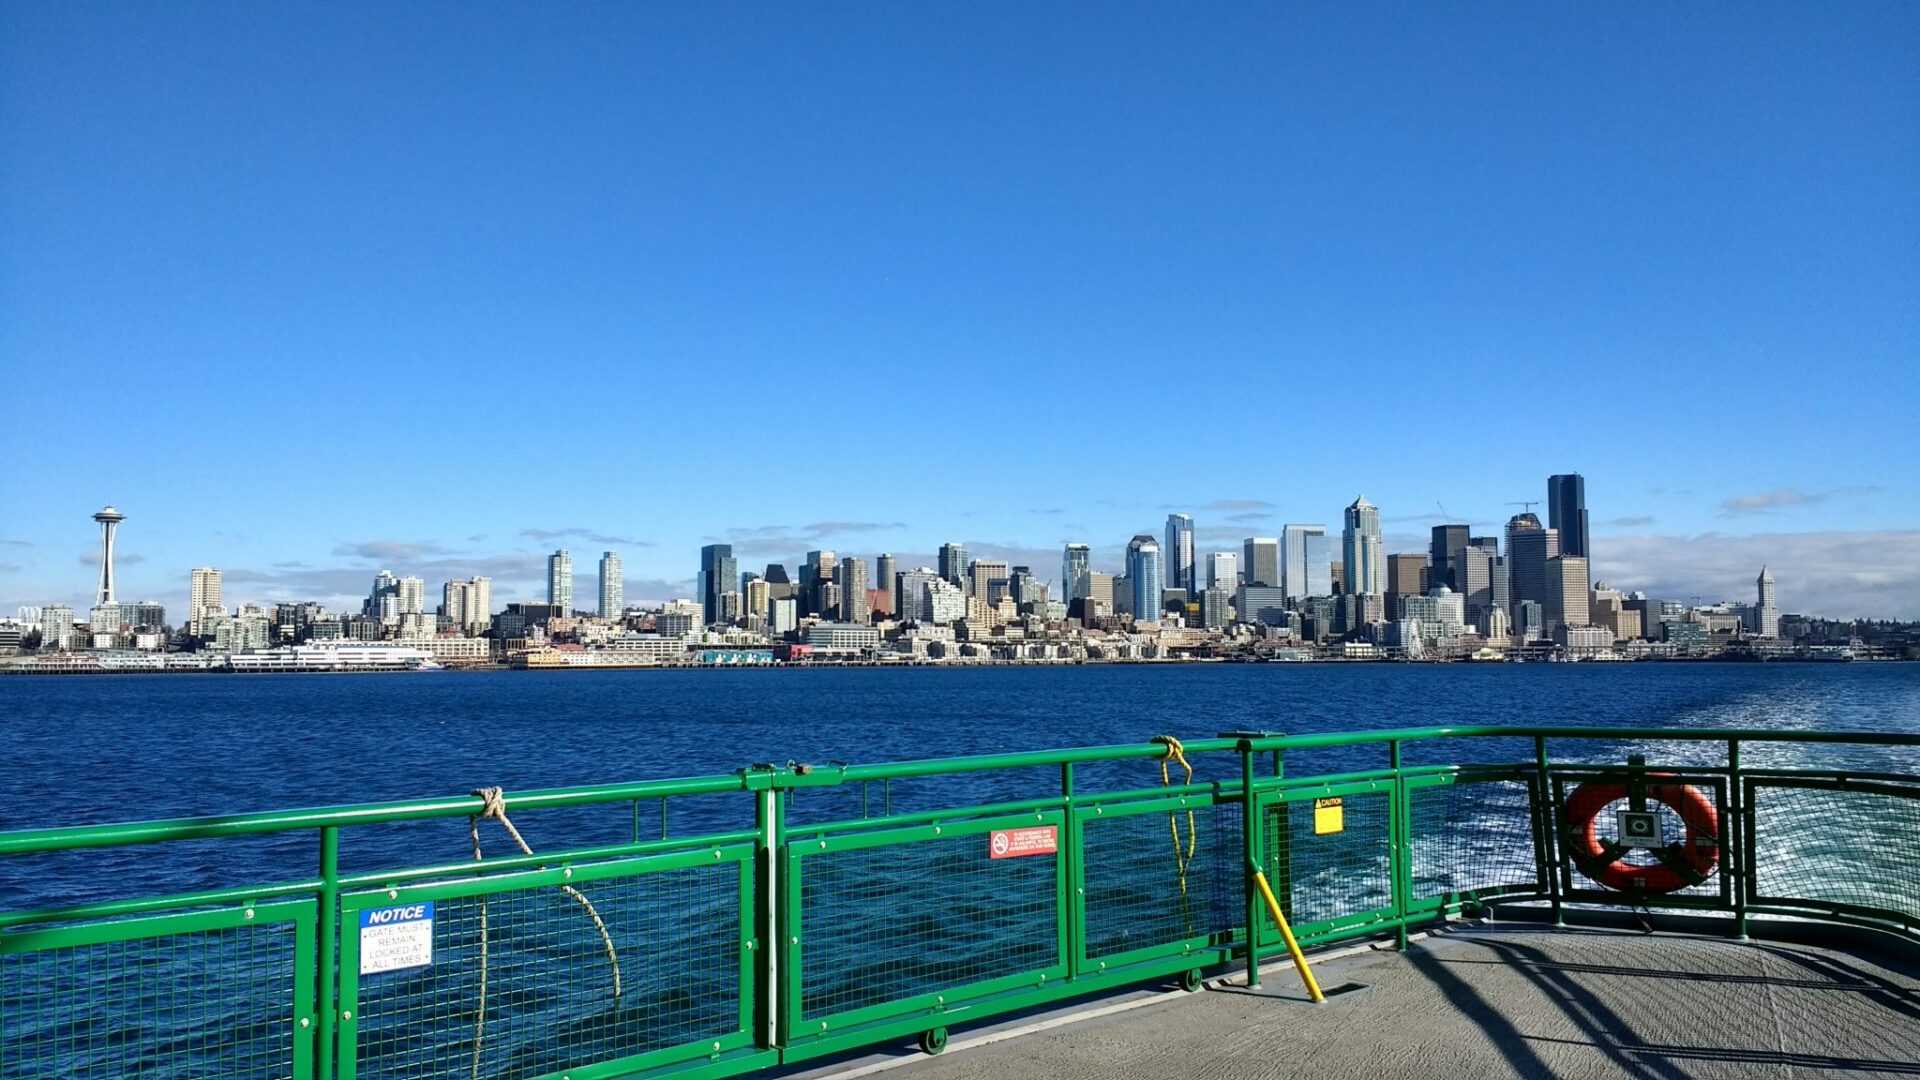 The Seattle city skyline from the ferry. The deck of the ferry is in the foreground. Heading to Bainbridge on the ferry is an important part of a Seattle Itinerary